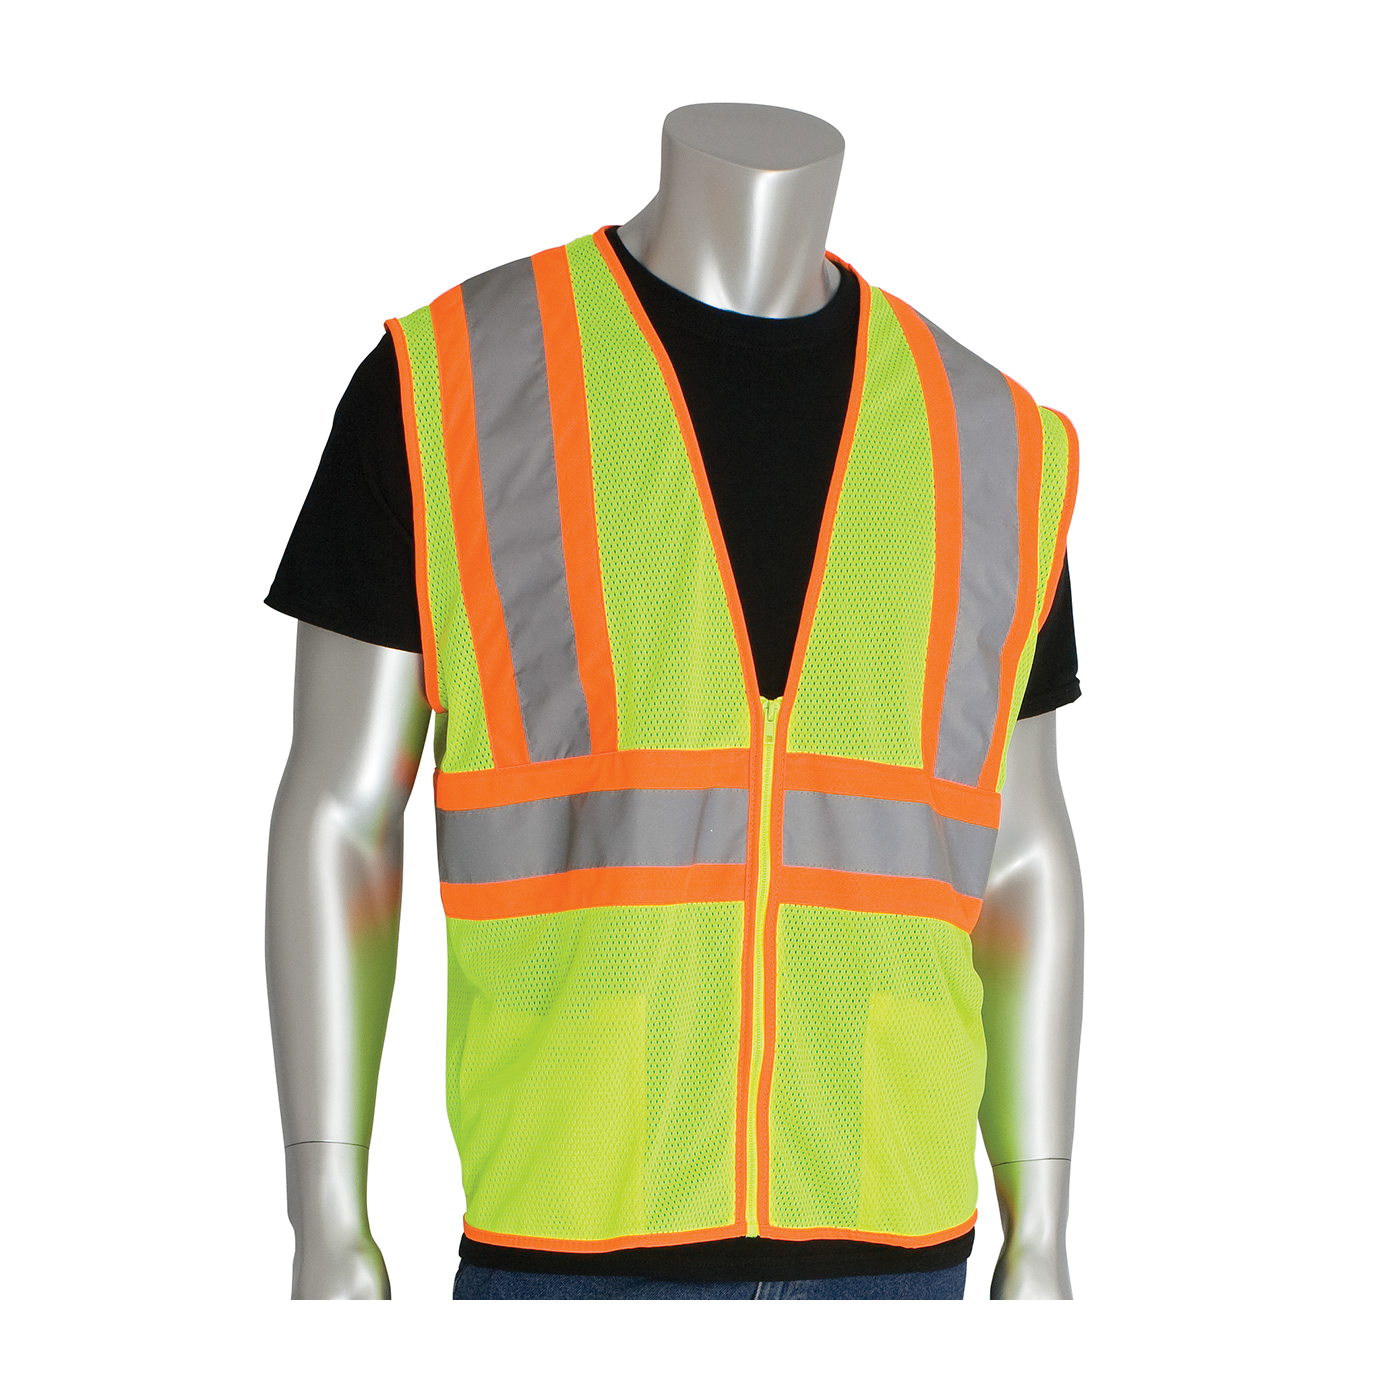 PIP® 302-MVLY-2X 2-Tone Safety Vest, 2XL, Hi-Viz Lime Yellow, Polyester Mesh, Zipper Closure, 2 Pockets, ANSI Class: Class 2, Specifications Met: ANSI 107 Type R